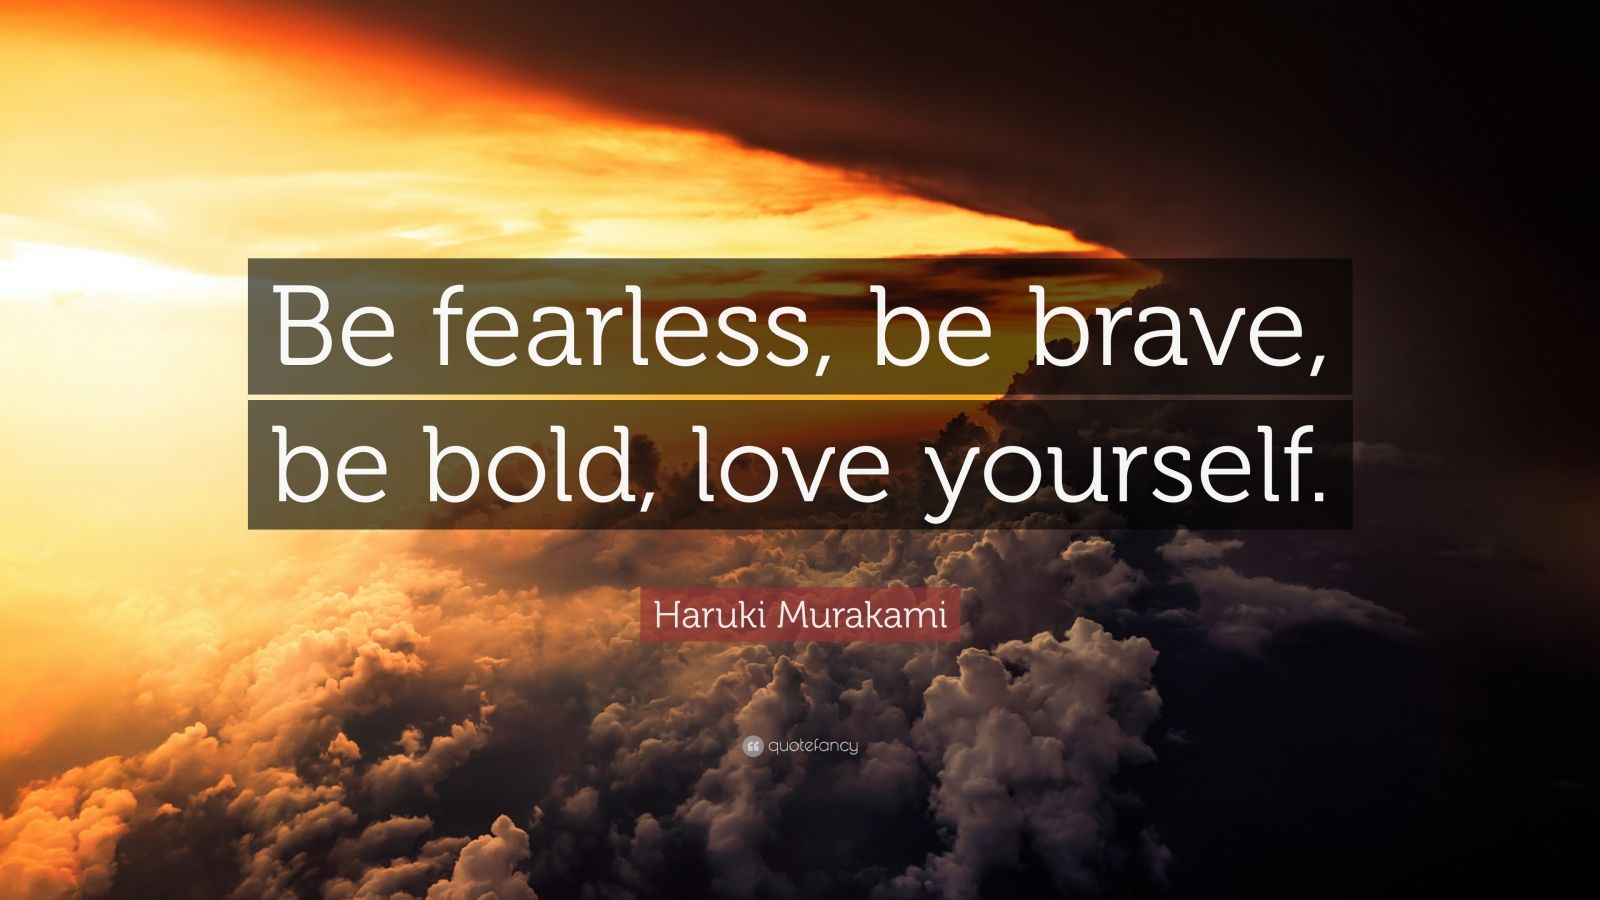 Haruki Murakami Quote: “Be fearless, be brave, be bold, love yourself ...